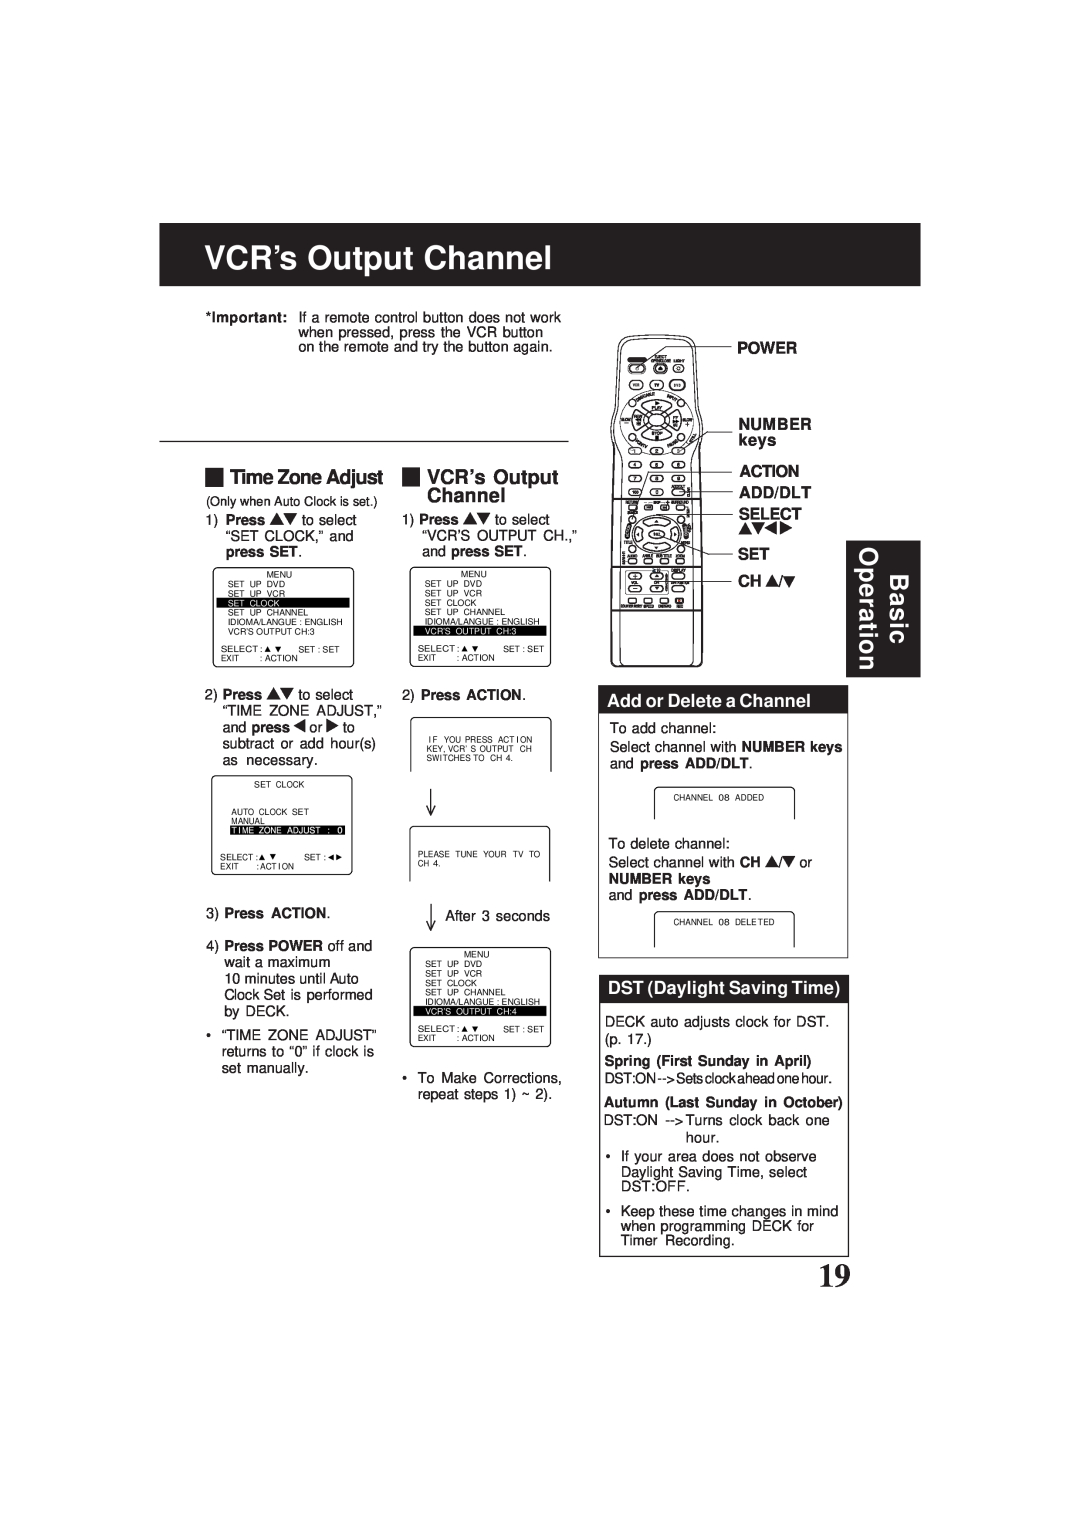 Panasonic PV-D4761 VCR’s Output Channel, Basic Operation, Time Zone Adjust, Add or Delete a Channel, Power, Number, keys 